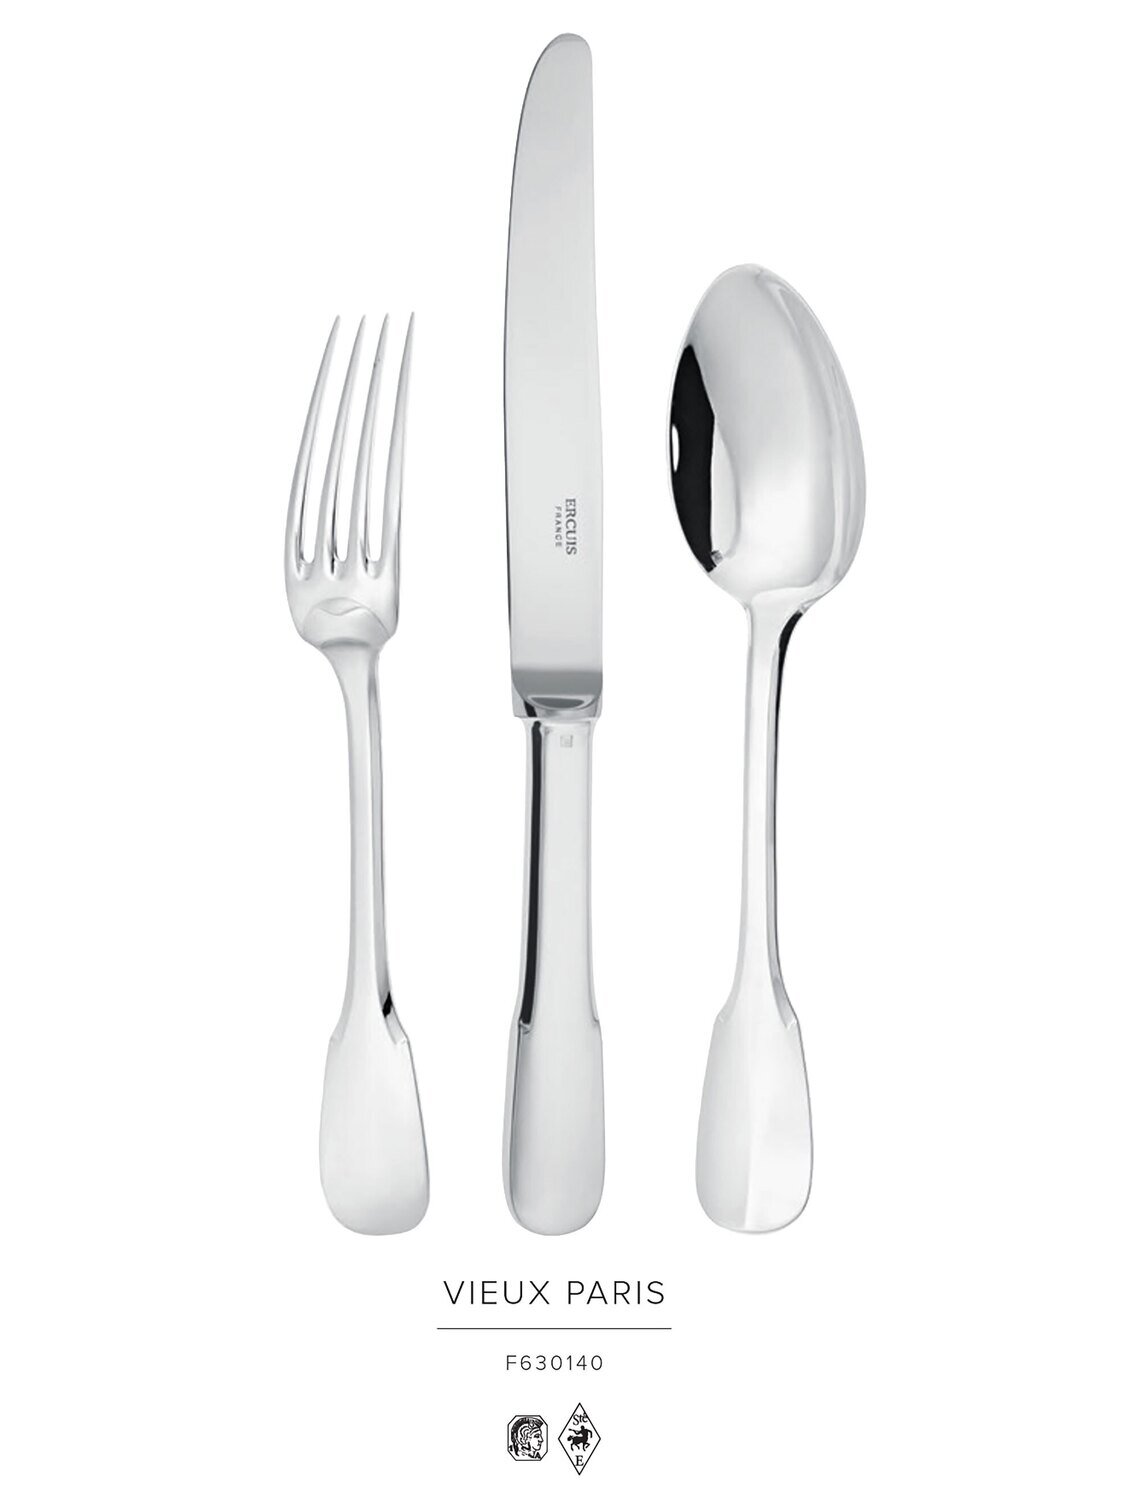 Ercuis Vieux Paris 5 Piece Place Setting with Anti-Tarnish Bag Sterling Silver F630140-DF